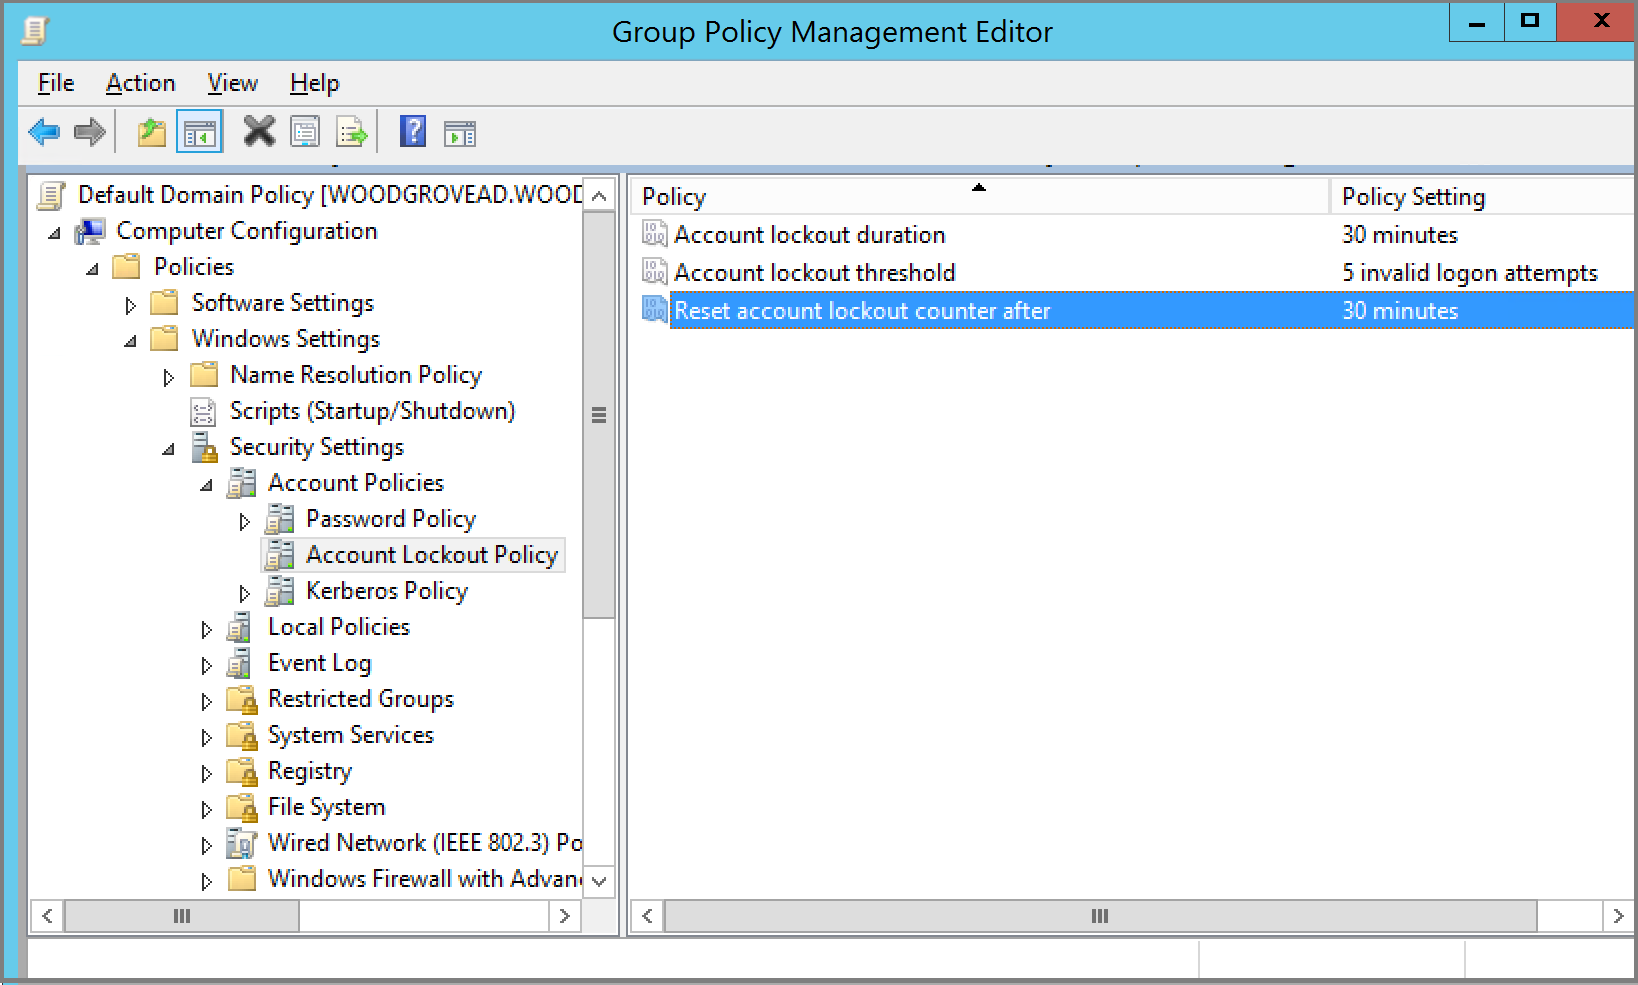 Check if any Group Policy settings are causing account lockouts
Verify if password policies are configured correctly